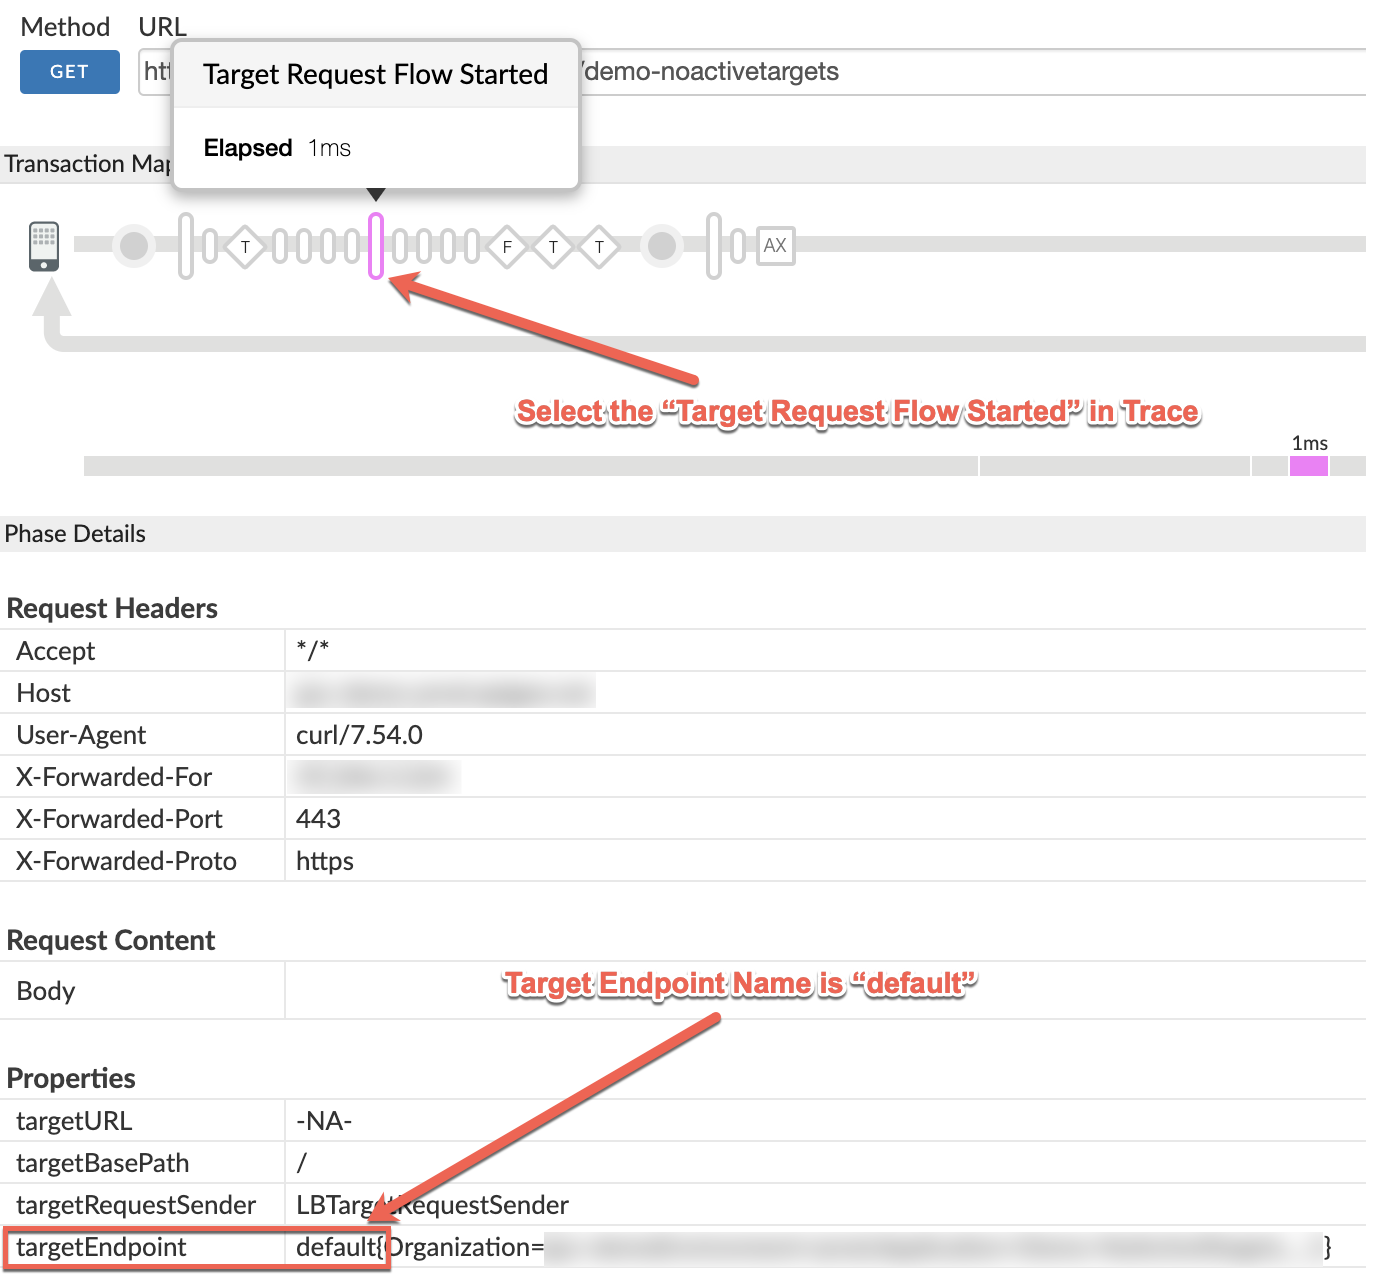 Determining target endpoint name from trace